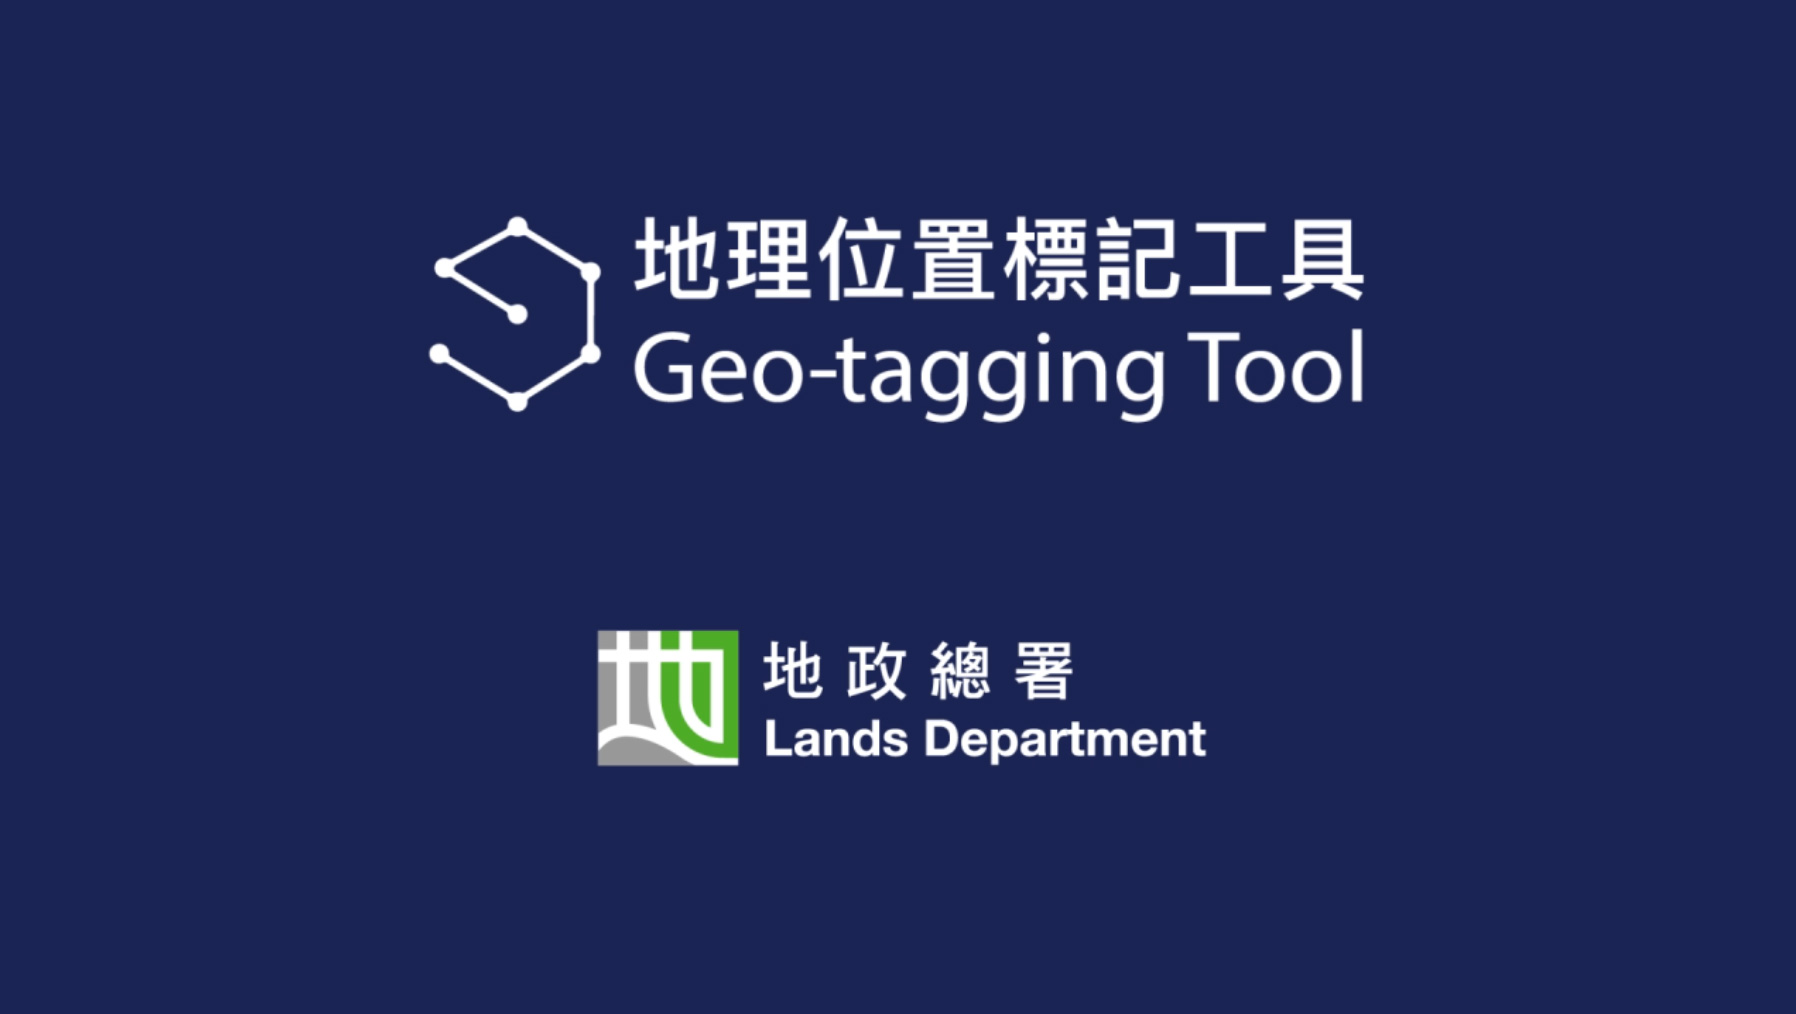 What’s Geo-tagging Tool